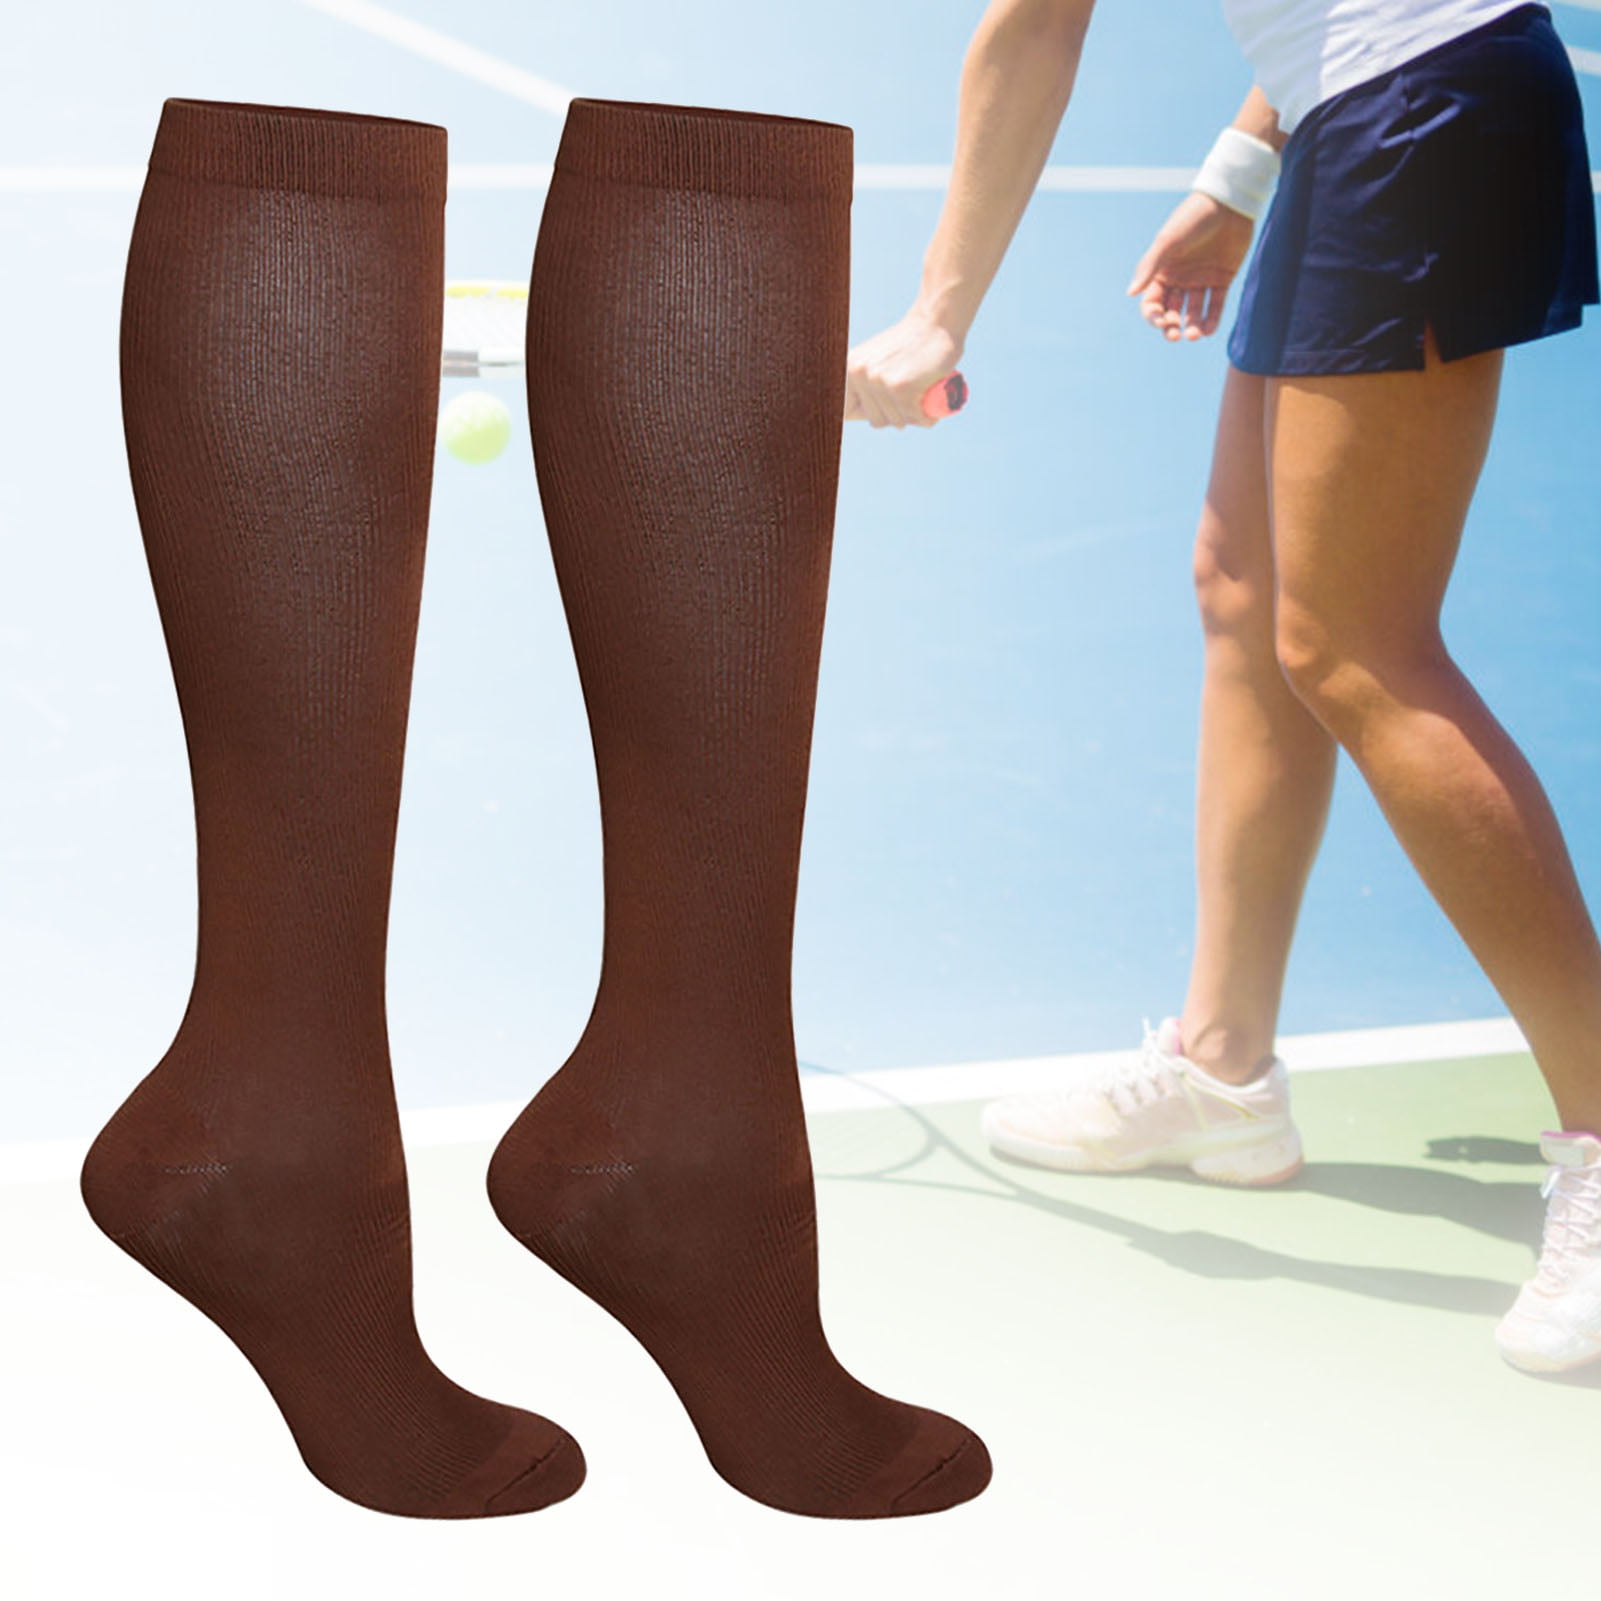 Details about   Outdoor Sport Compression Riding Sock Women Men Cycling Running Calf Length 